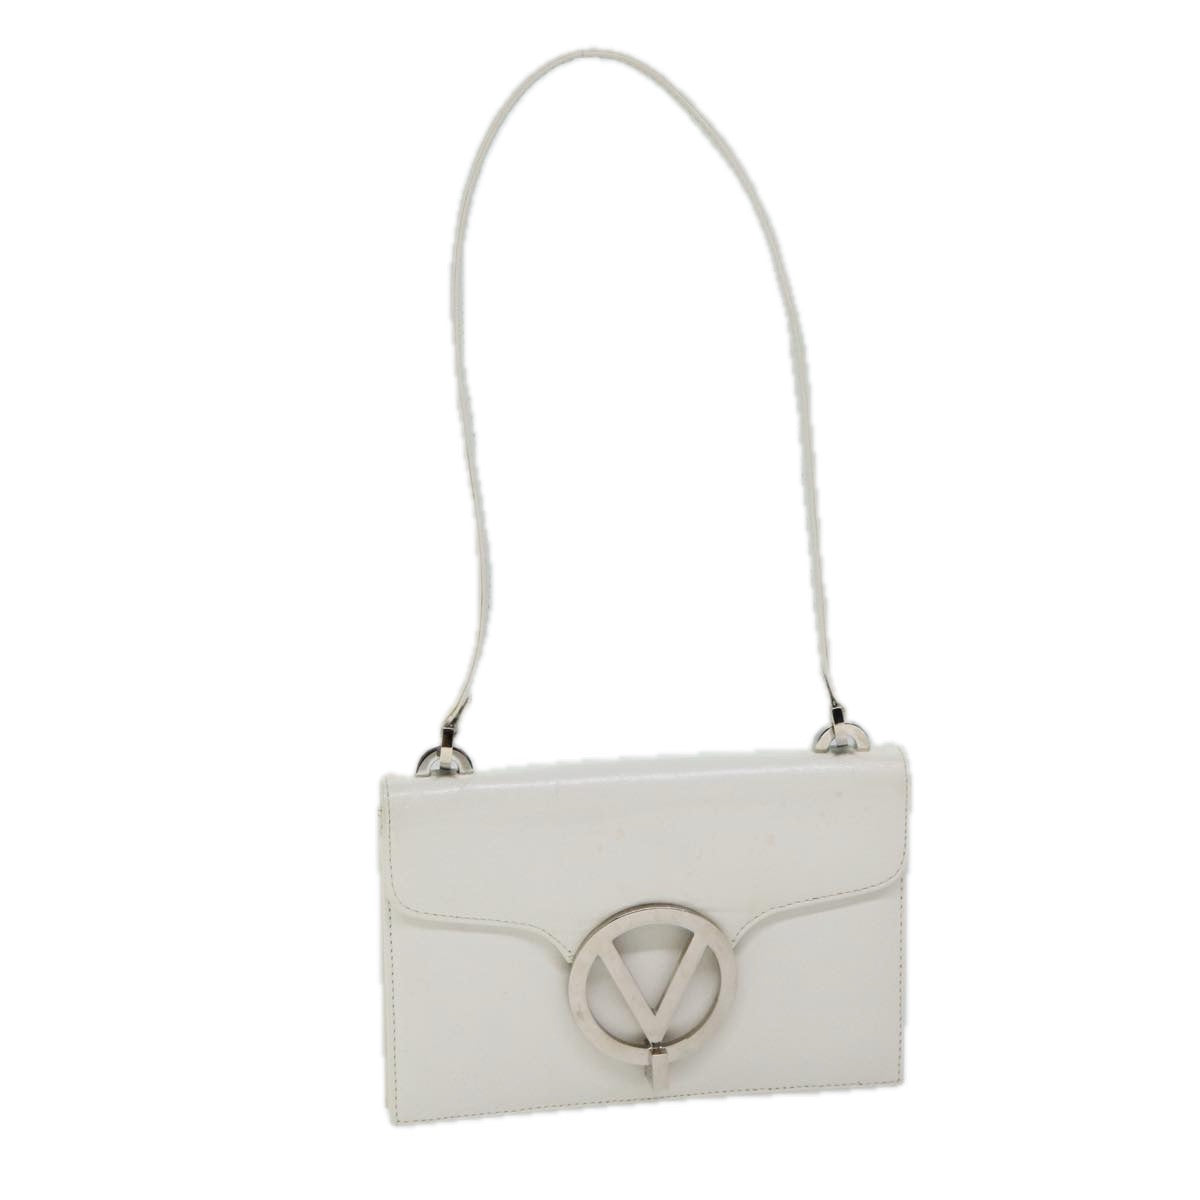 VALENTINO Shoulder Bag Leather White Auth bs13333